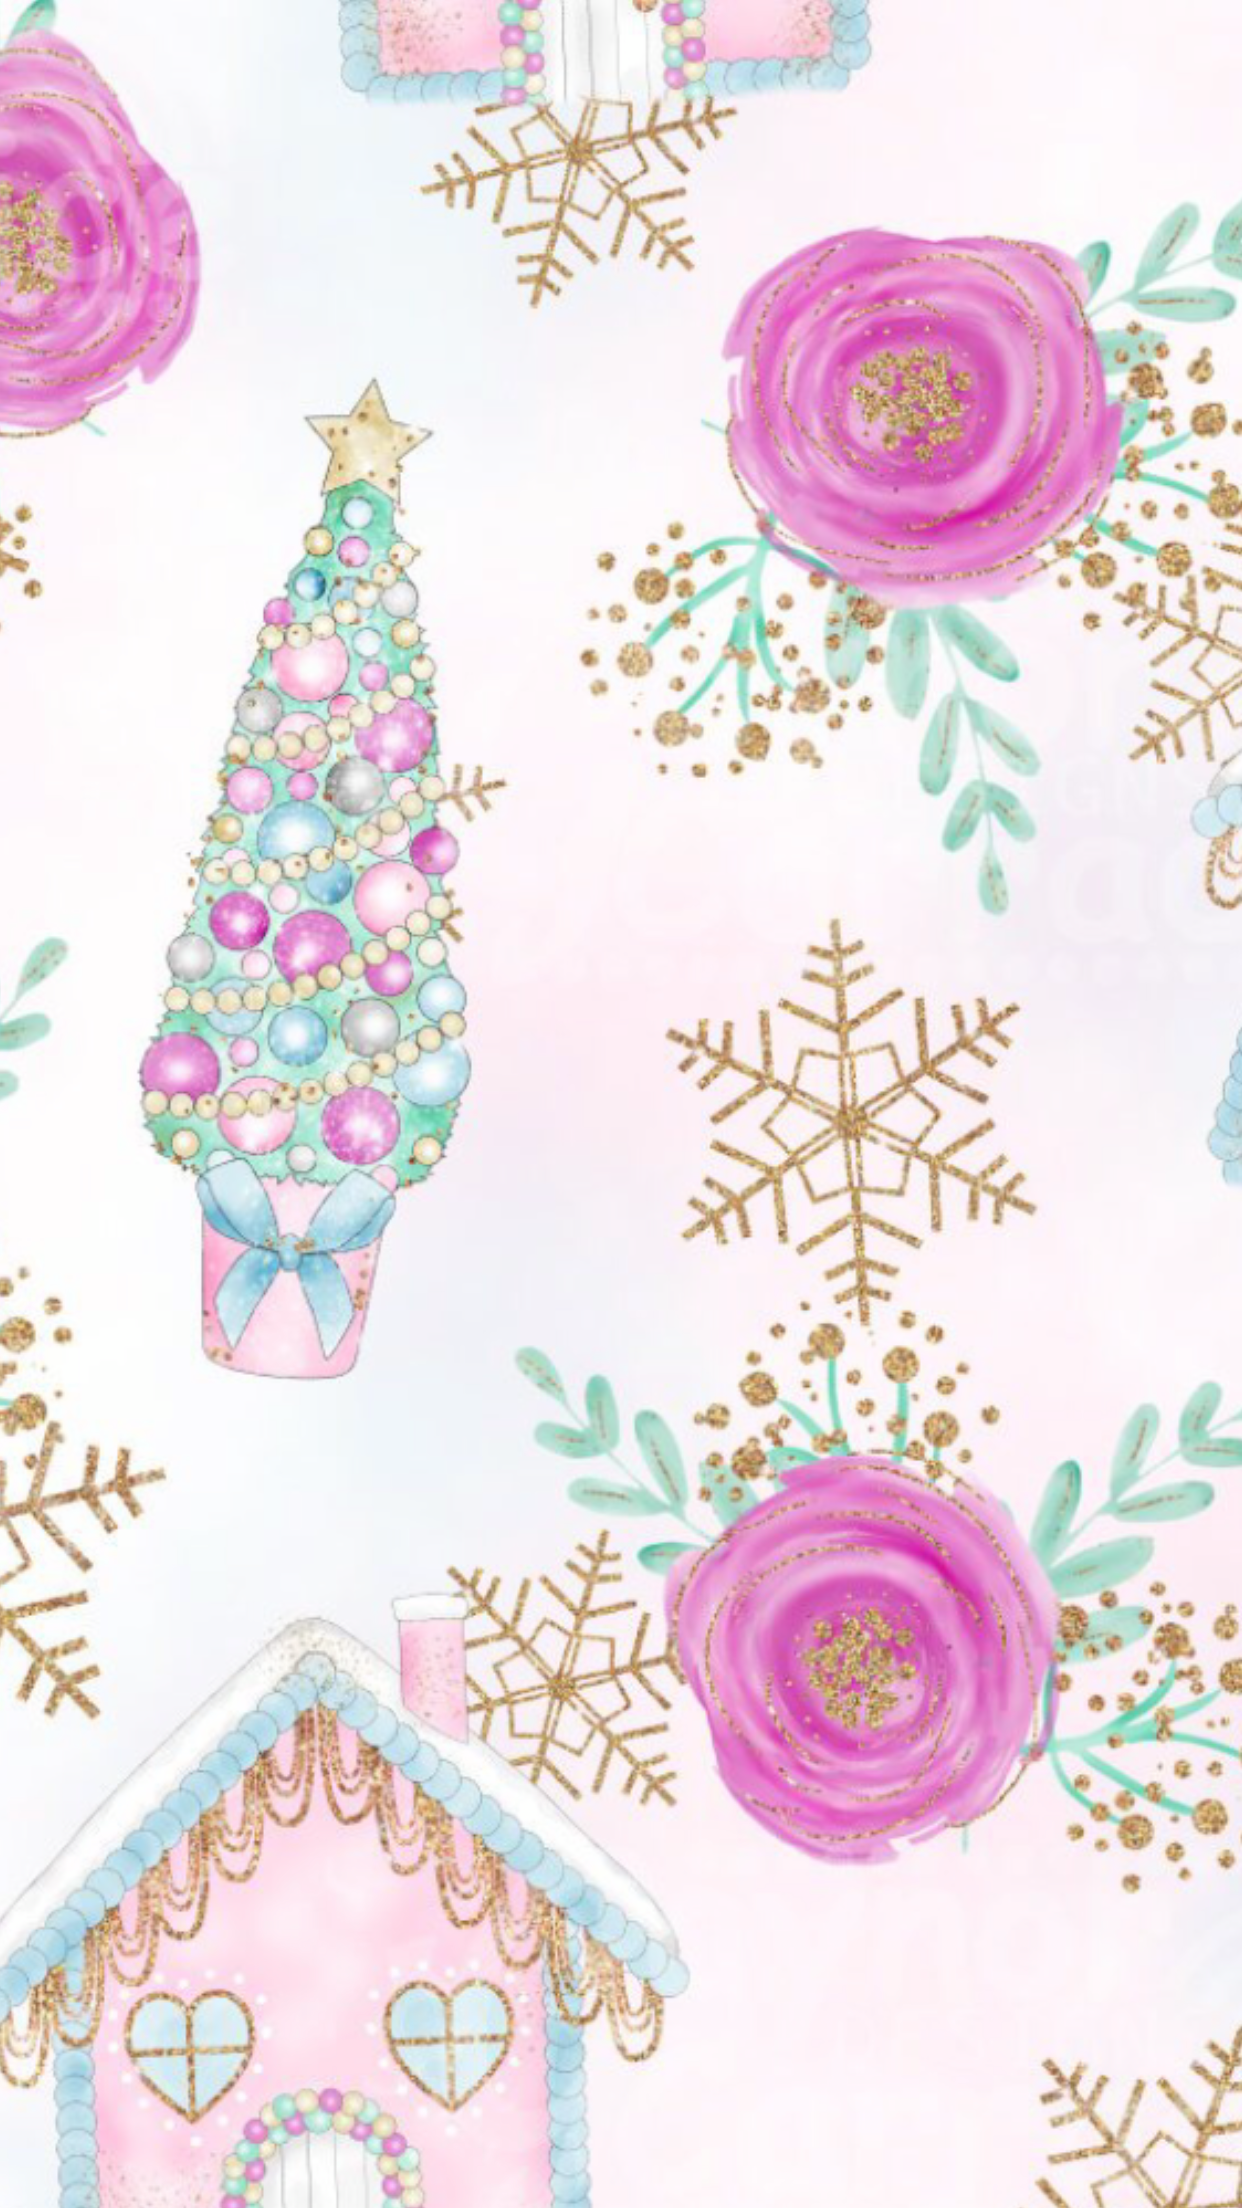 Cute Vintage Wallpaper For Iphone Christmas Cute Wallpaper Vintage
Iphone Girly Wallpapers Backgrounds Collection Mood Yourself Perfect
These Set Pink Wallpaperaccess Homediy